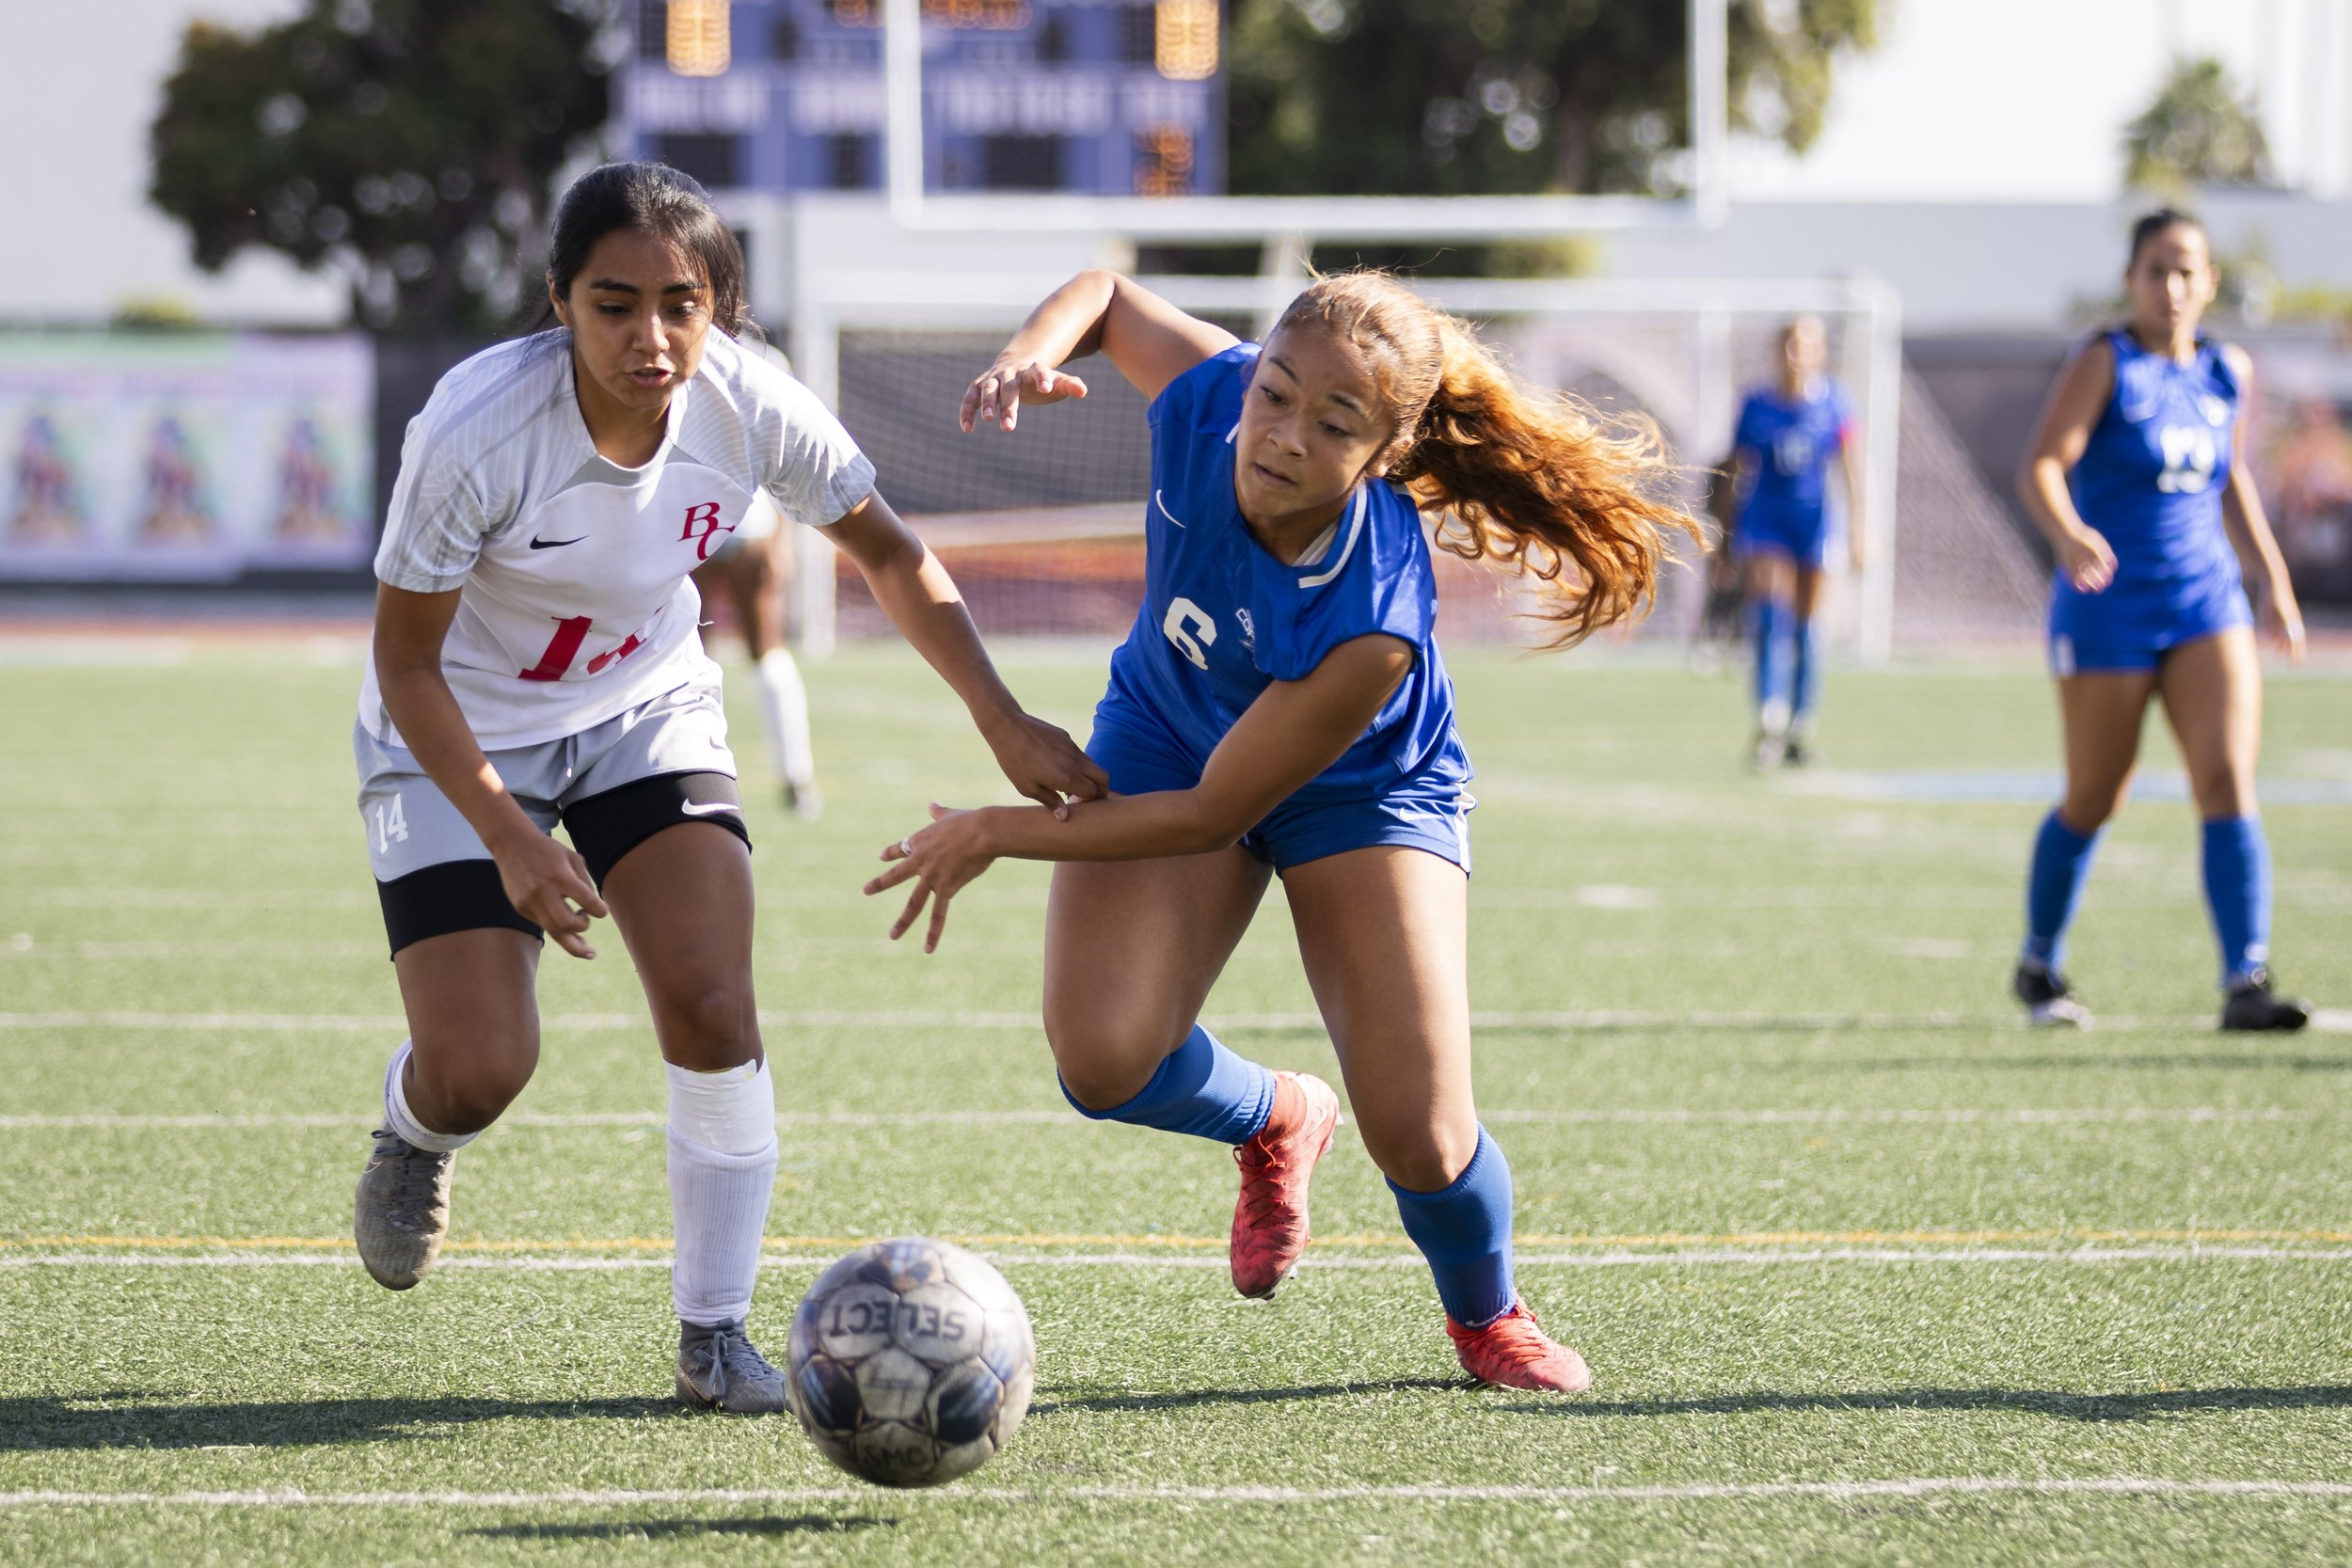  Santa Monica College Corsair forward Tia Lucas (right) attempting to score while Bakersfield College Renegade winger Camila Moncada defends during the second half of a home game in Santa Monica, Calif., on Friday, Oct. 27, 2023. The Corsairs won 4-1